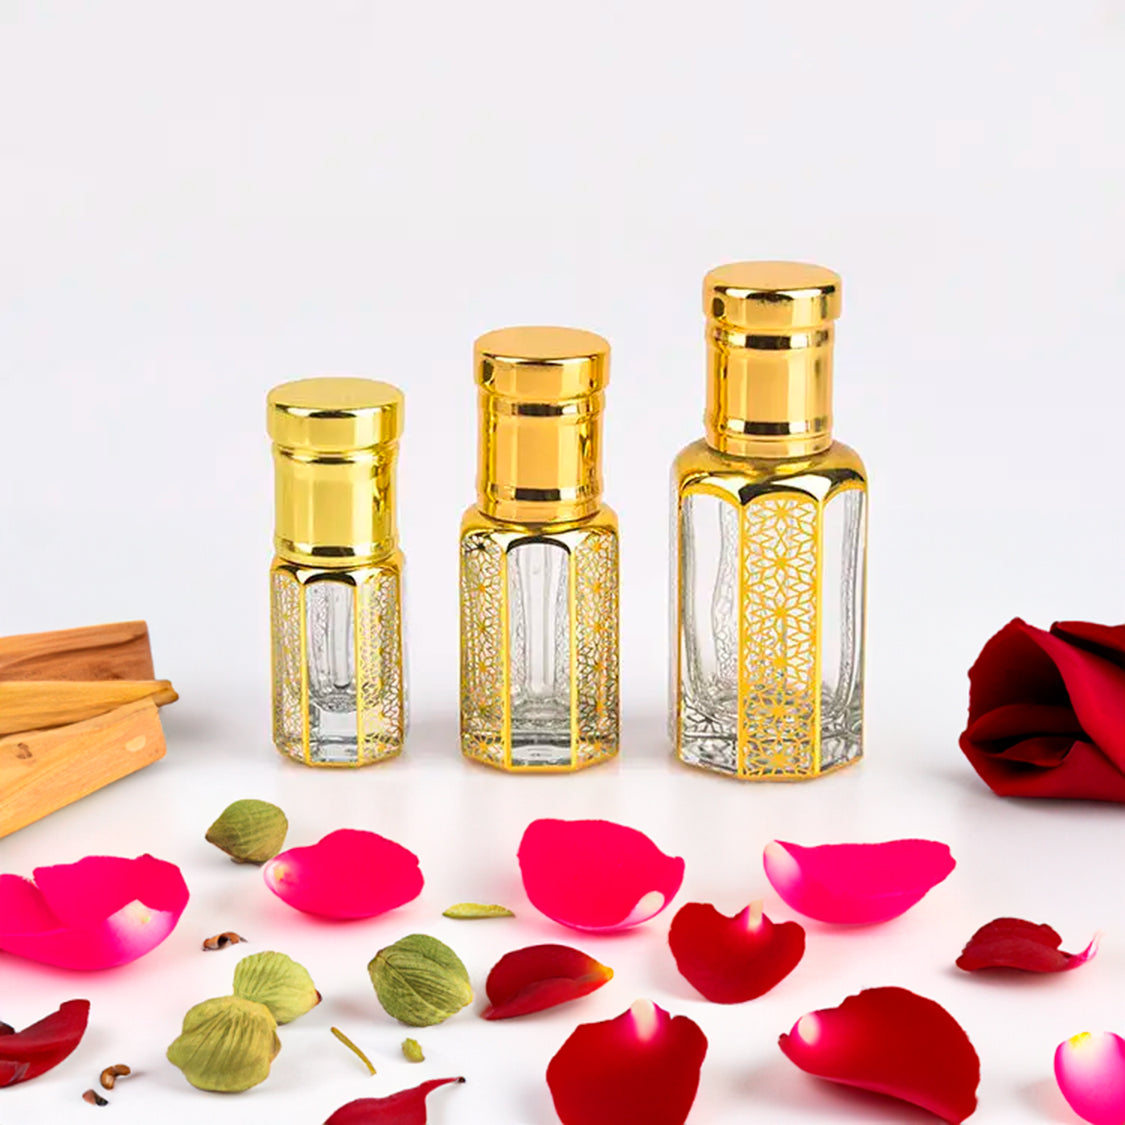 Flora Five White Arabian Oudh fragrance attar bottles in three sizes with intricate golden designs, surrounded by rose petals, cardamom, and sandalwood. This long-lasting attar offers a sweet floral and woody fragrance, perfect for those seeking a luxurious and enduring scent experience.